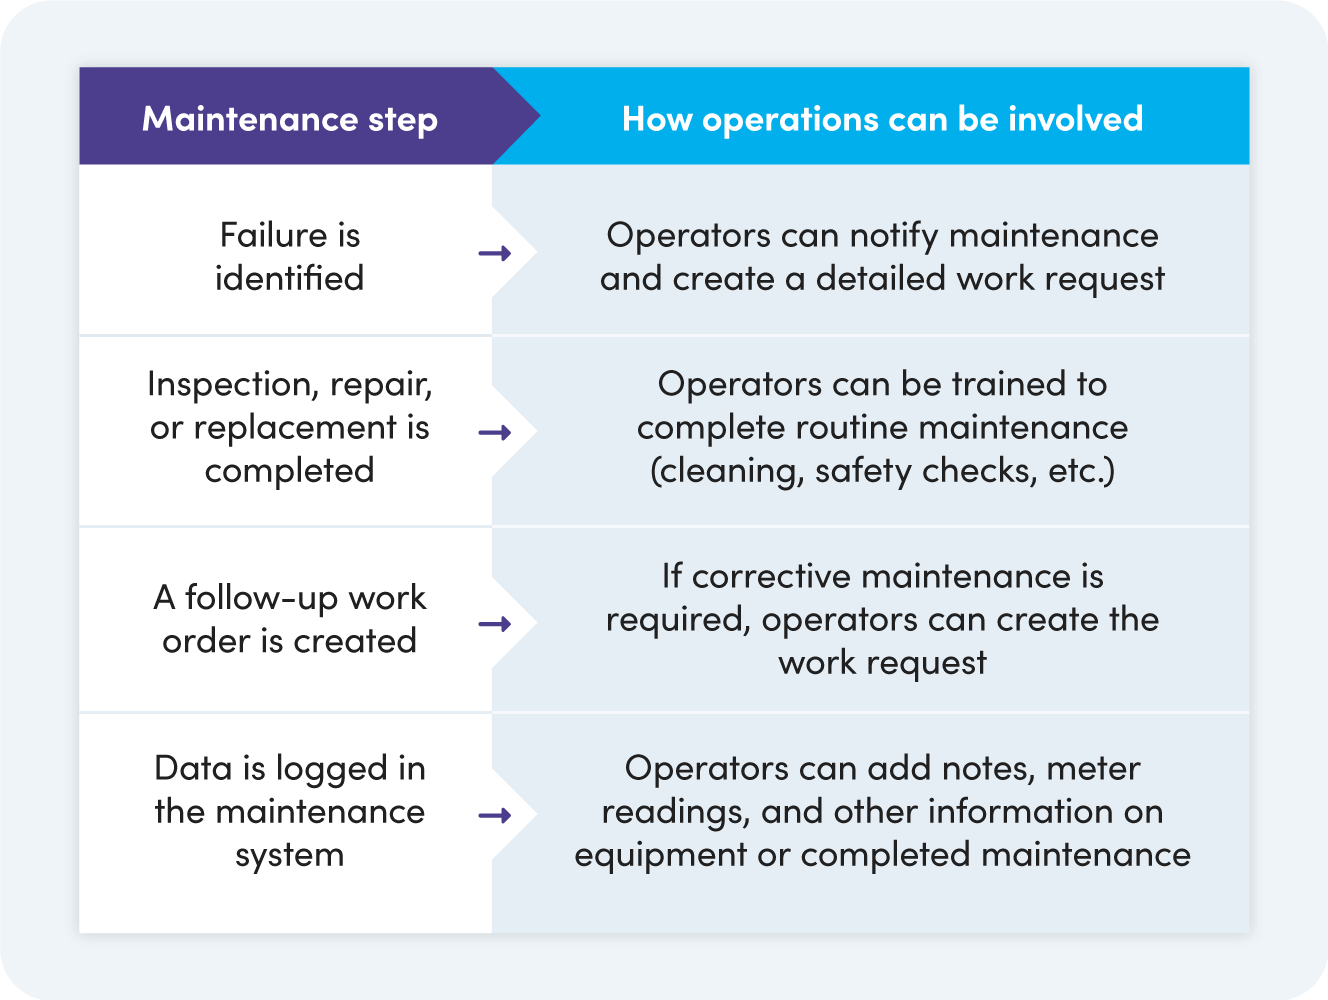 How operations can be involved chart